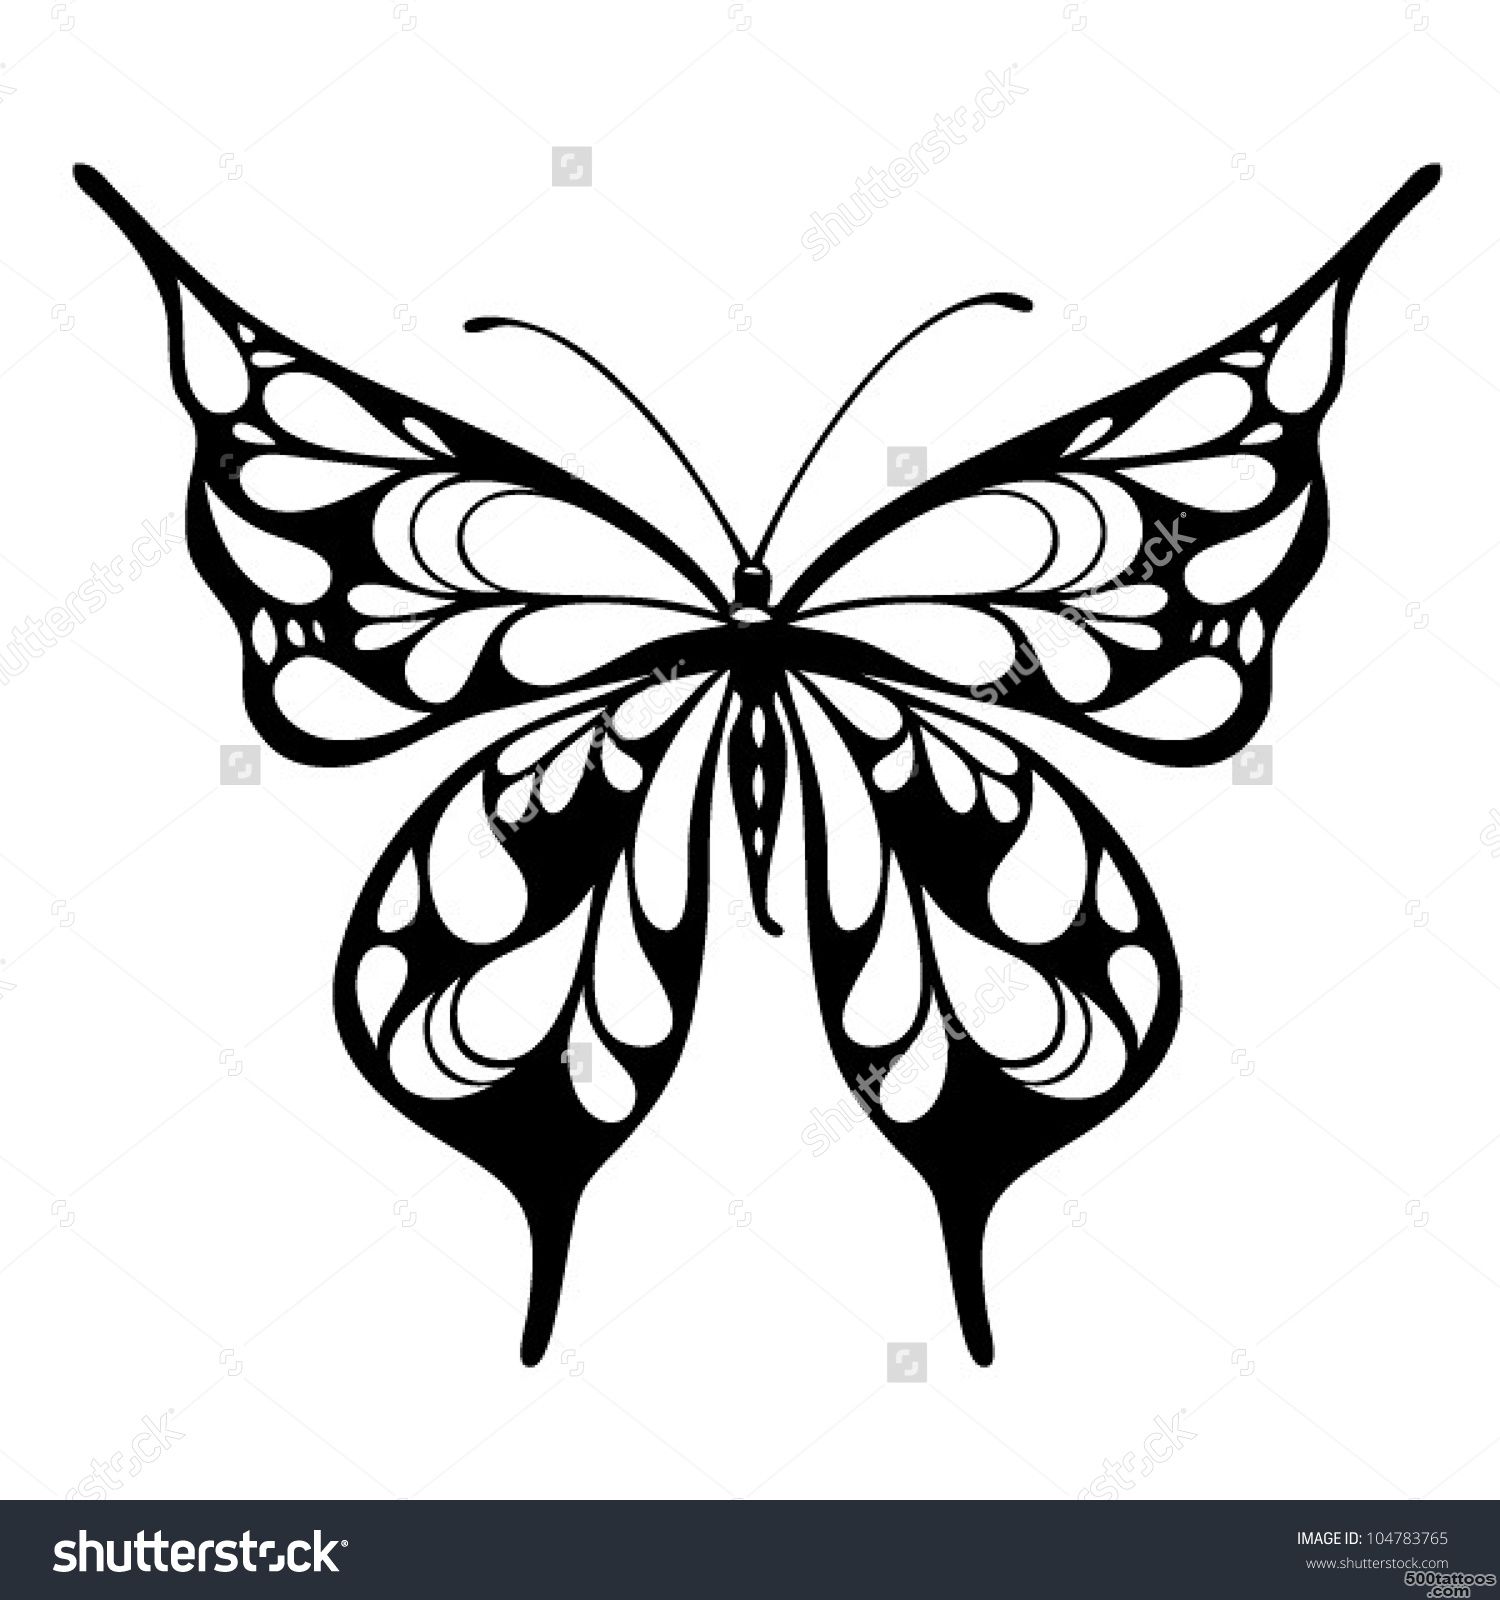 Butterfly Tattoo Stock Photos, Images, amp Pictures  Shutterstock_29